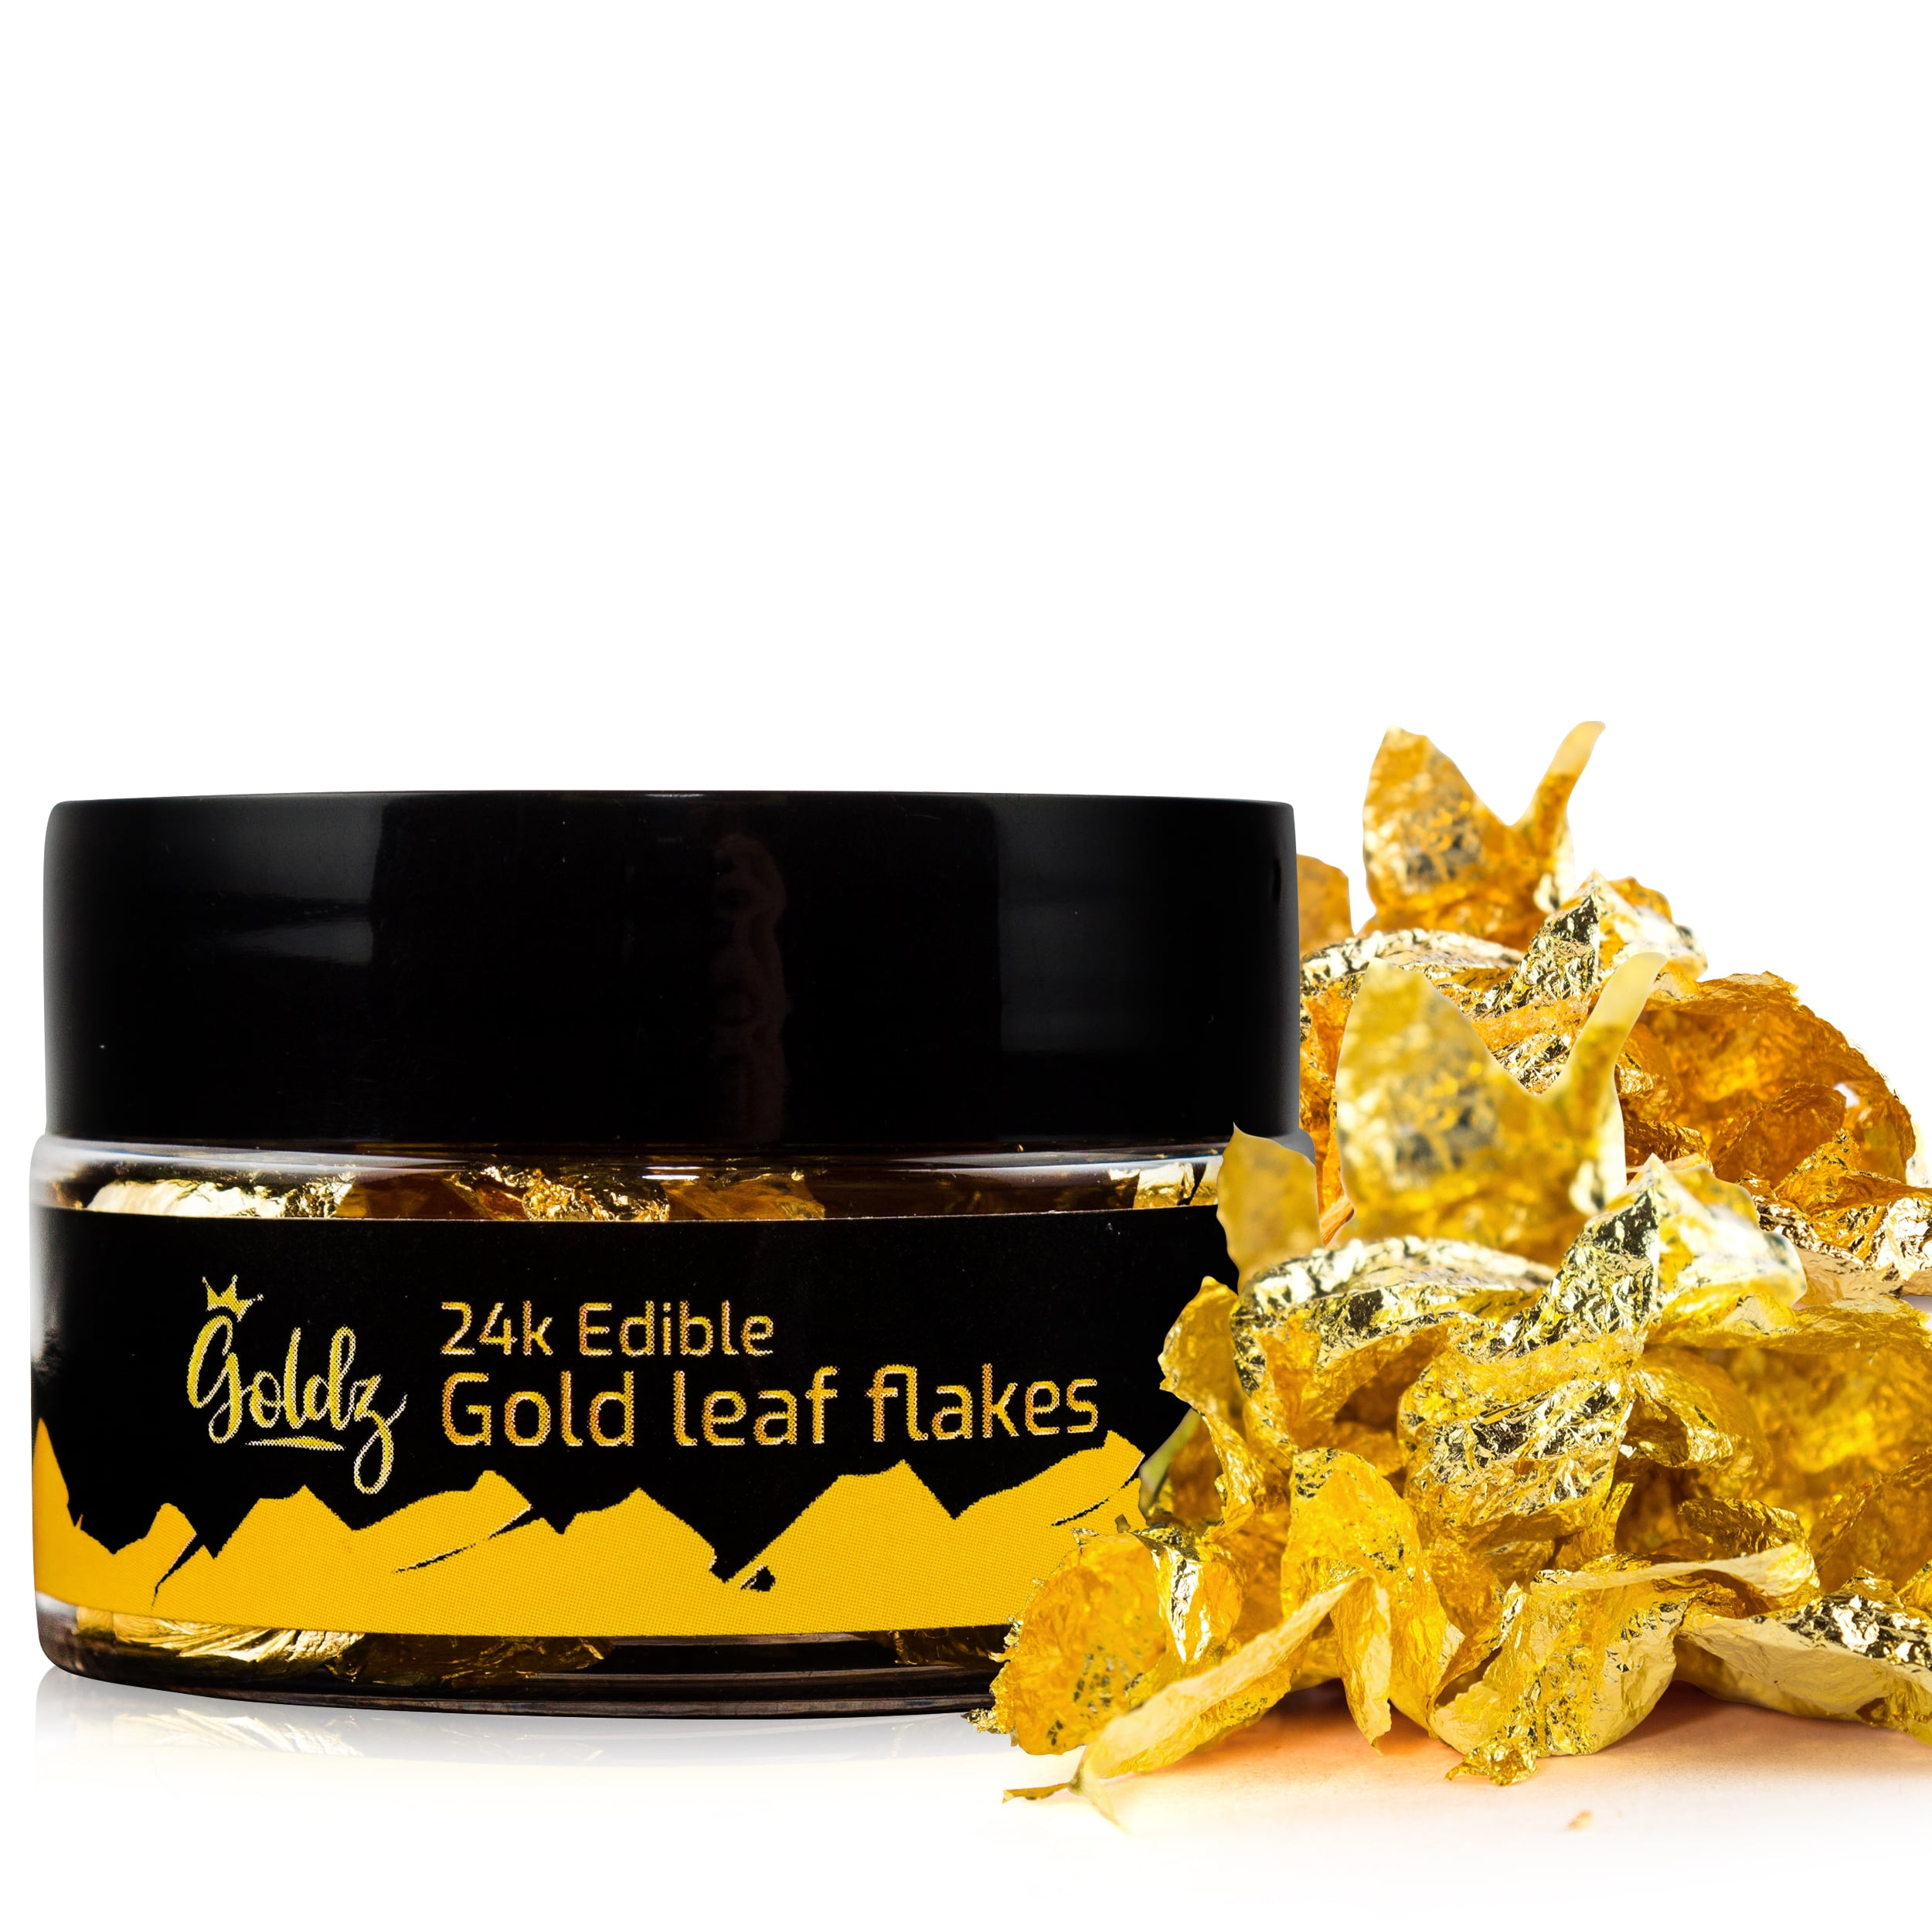 goldz: 24 Karat Edible Gold Leaf- Gold Foil Flakes for Cake Decorations, Glitter for Drinks and Cocktails, Chocolate Making and More 30ml, Size: 30 ml